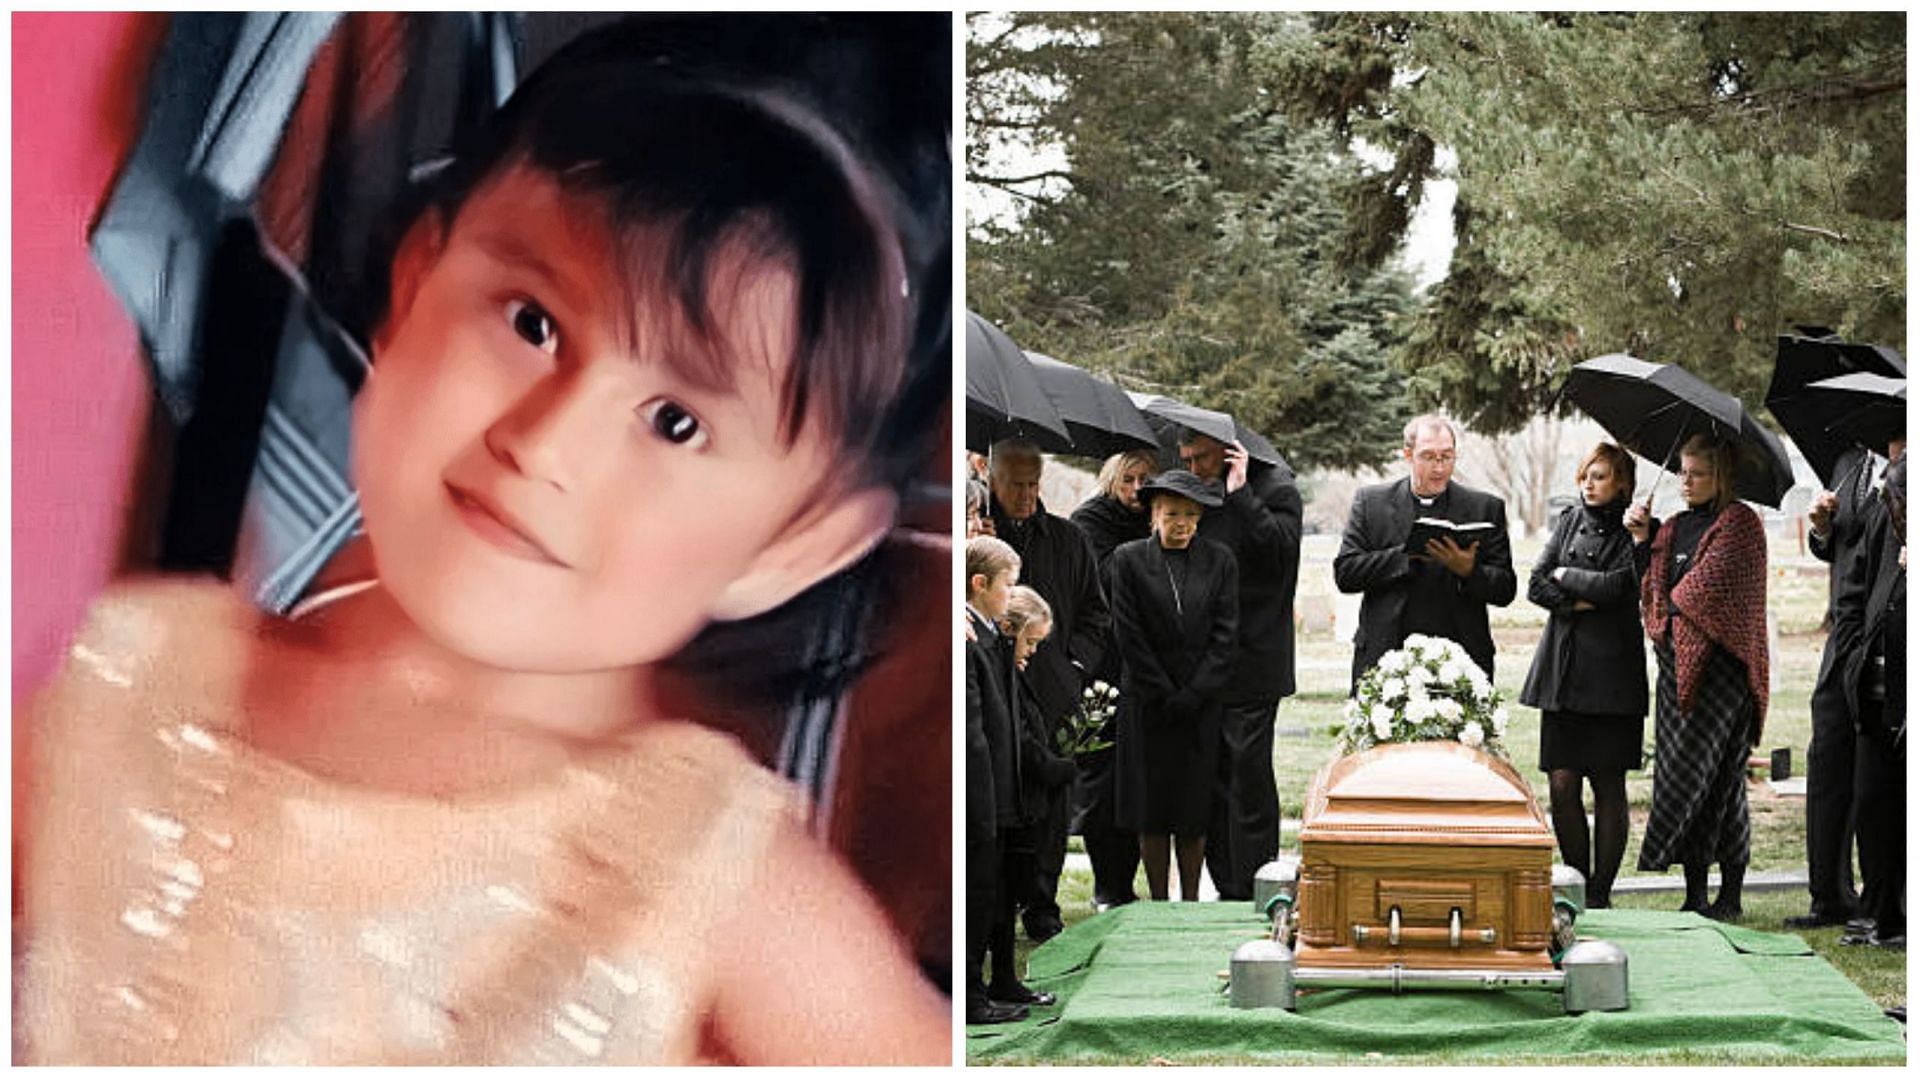 3 year old Camila woke up at her own funeral (Image via @balleralert/Twitter and RubberBall Productions/Getty images)